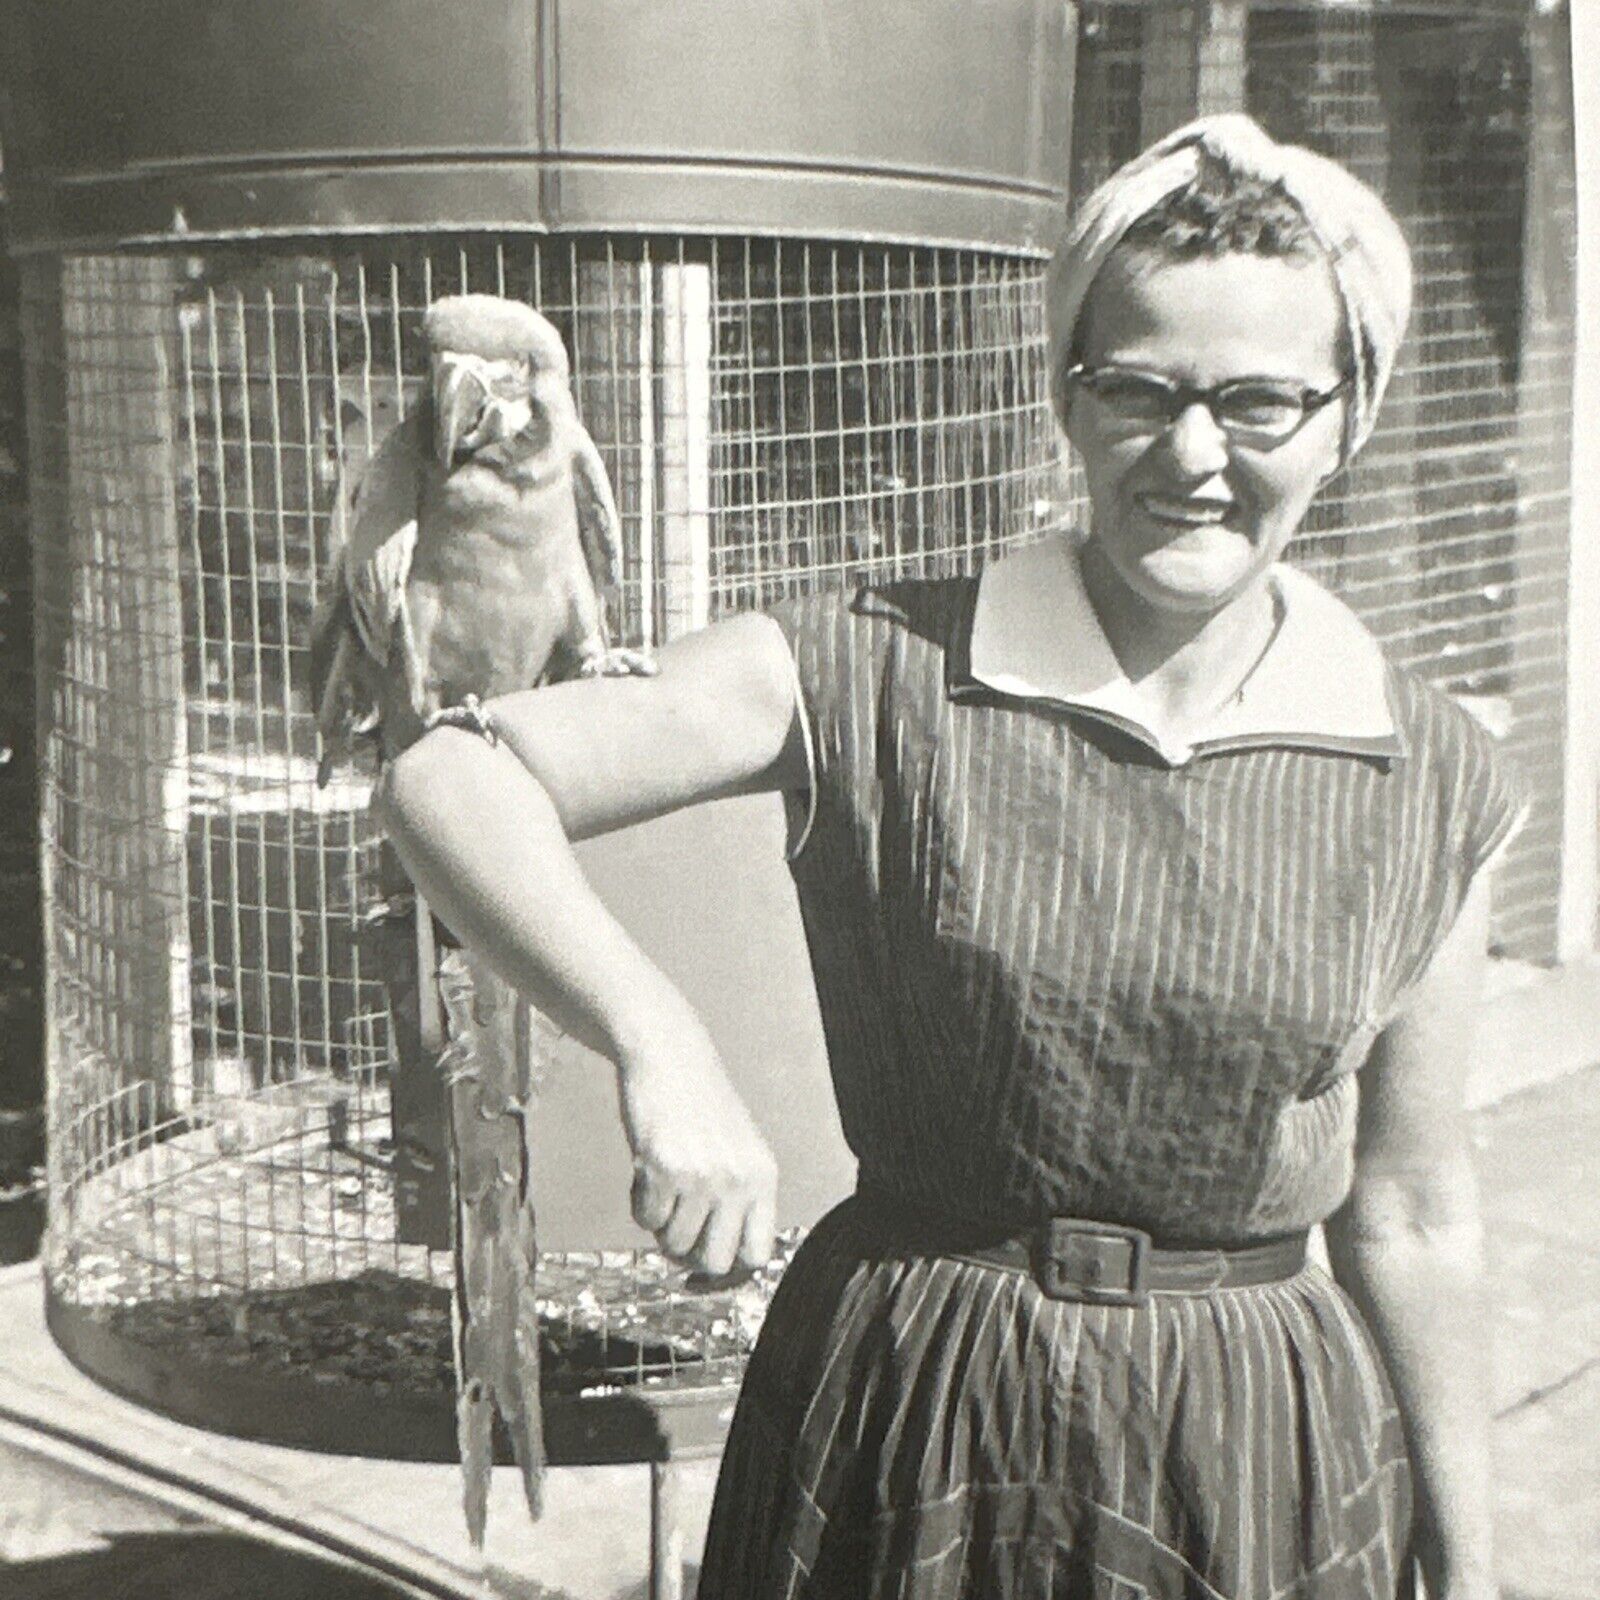 VINTAGE PHOTO Woman With Scarlett Macaw Parrot On Arm 1950S Snapshot